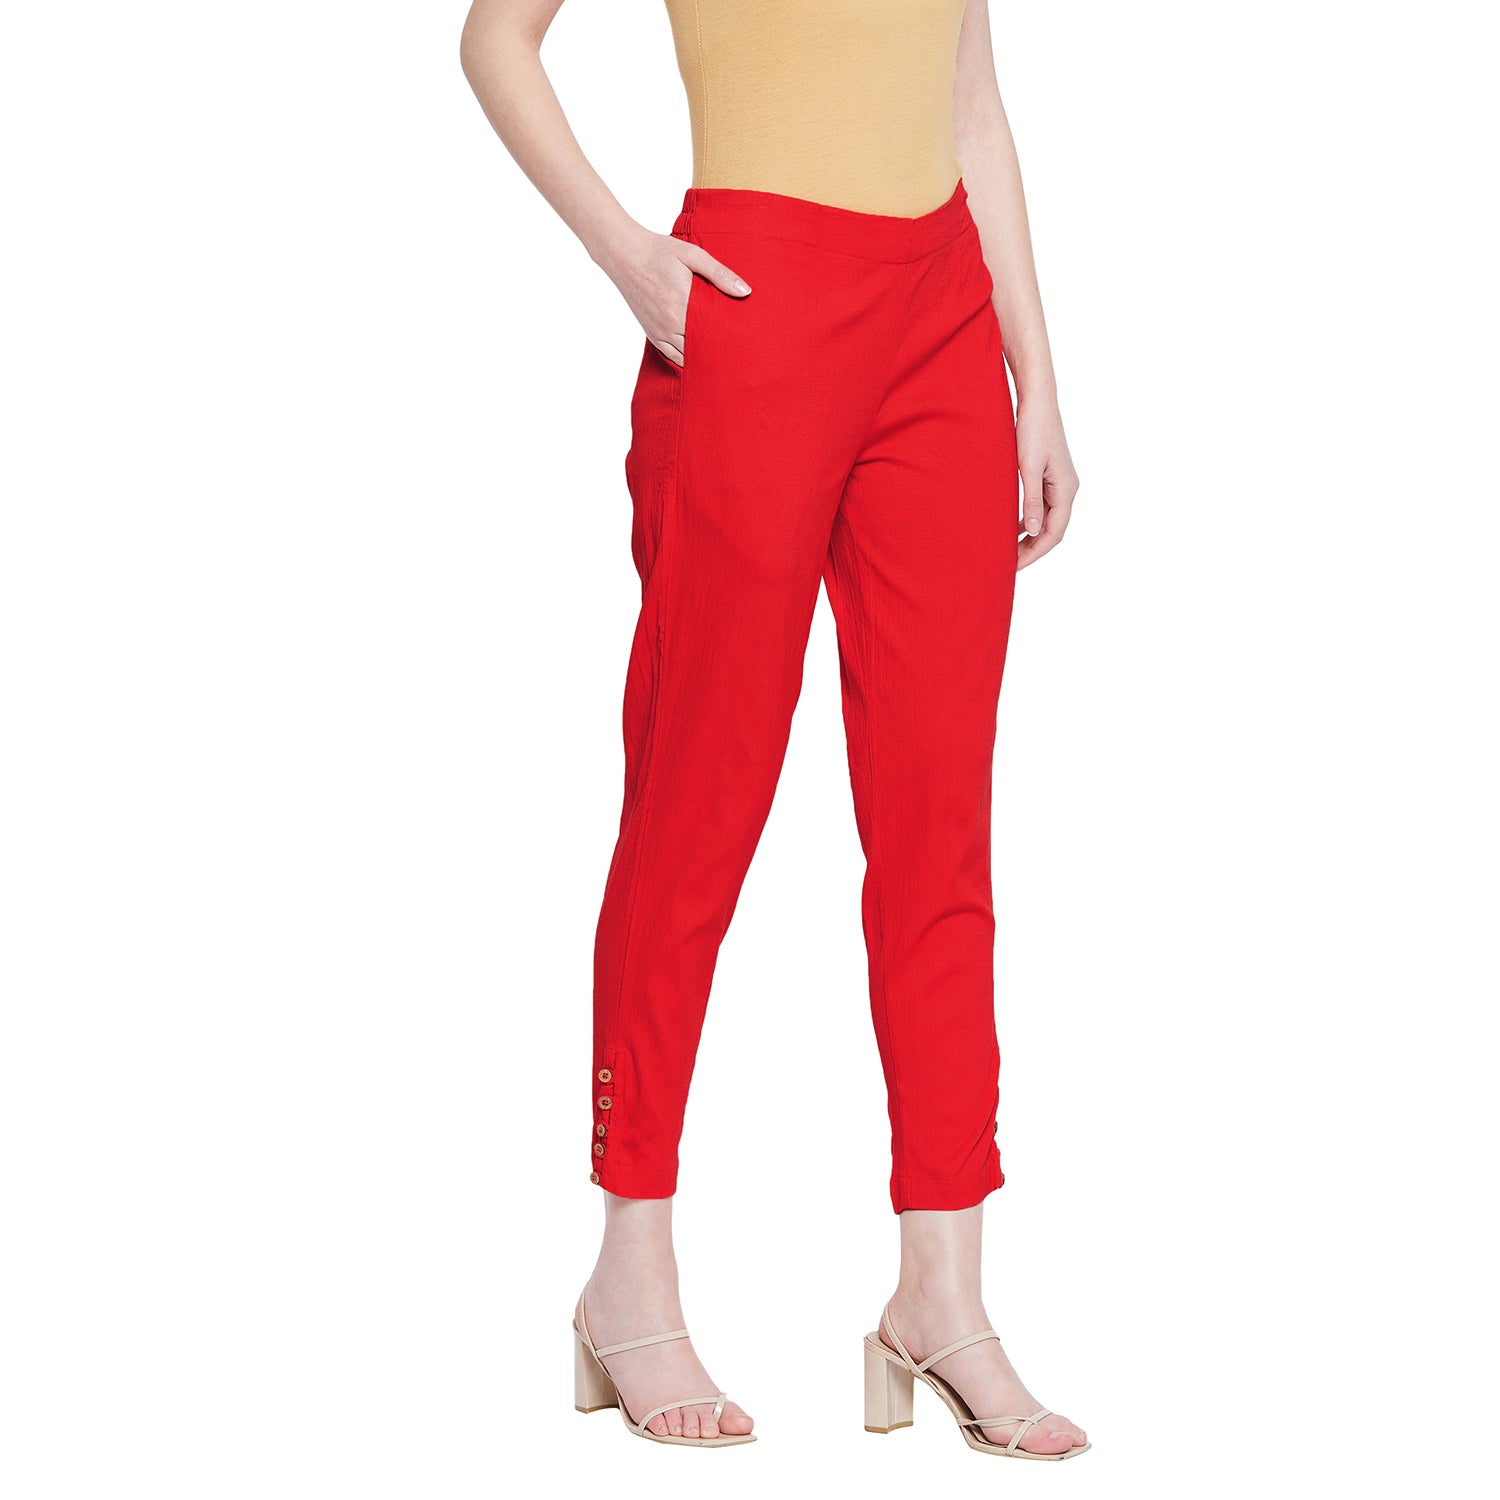 Buy Lux Lyra Women's Track Pant 312 -Red Online